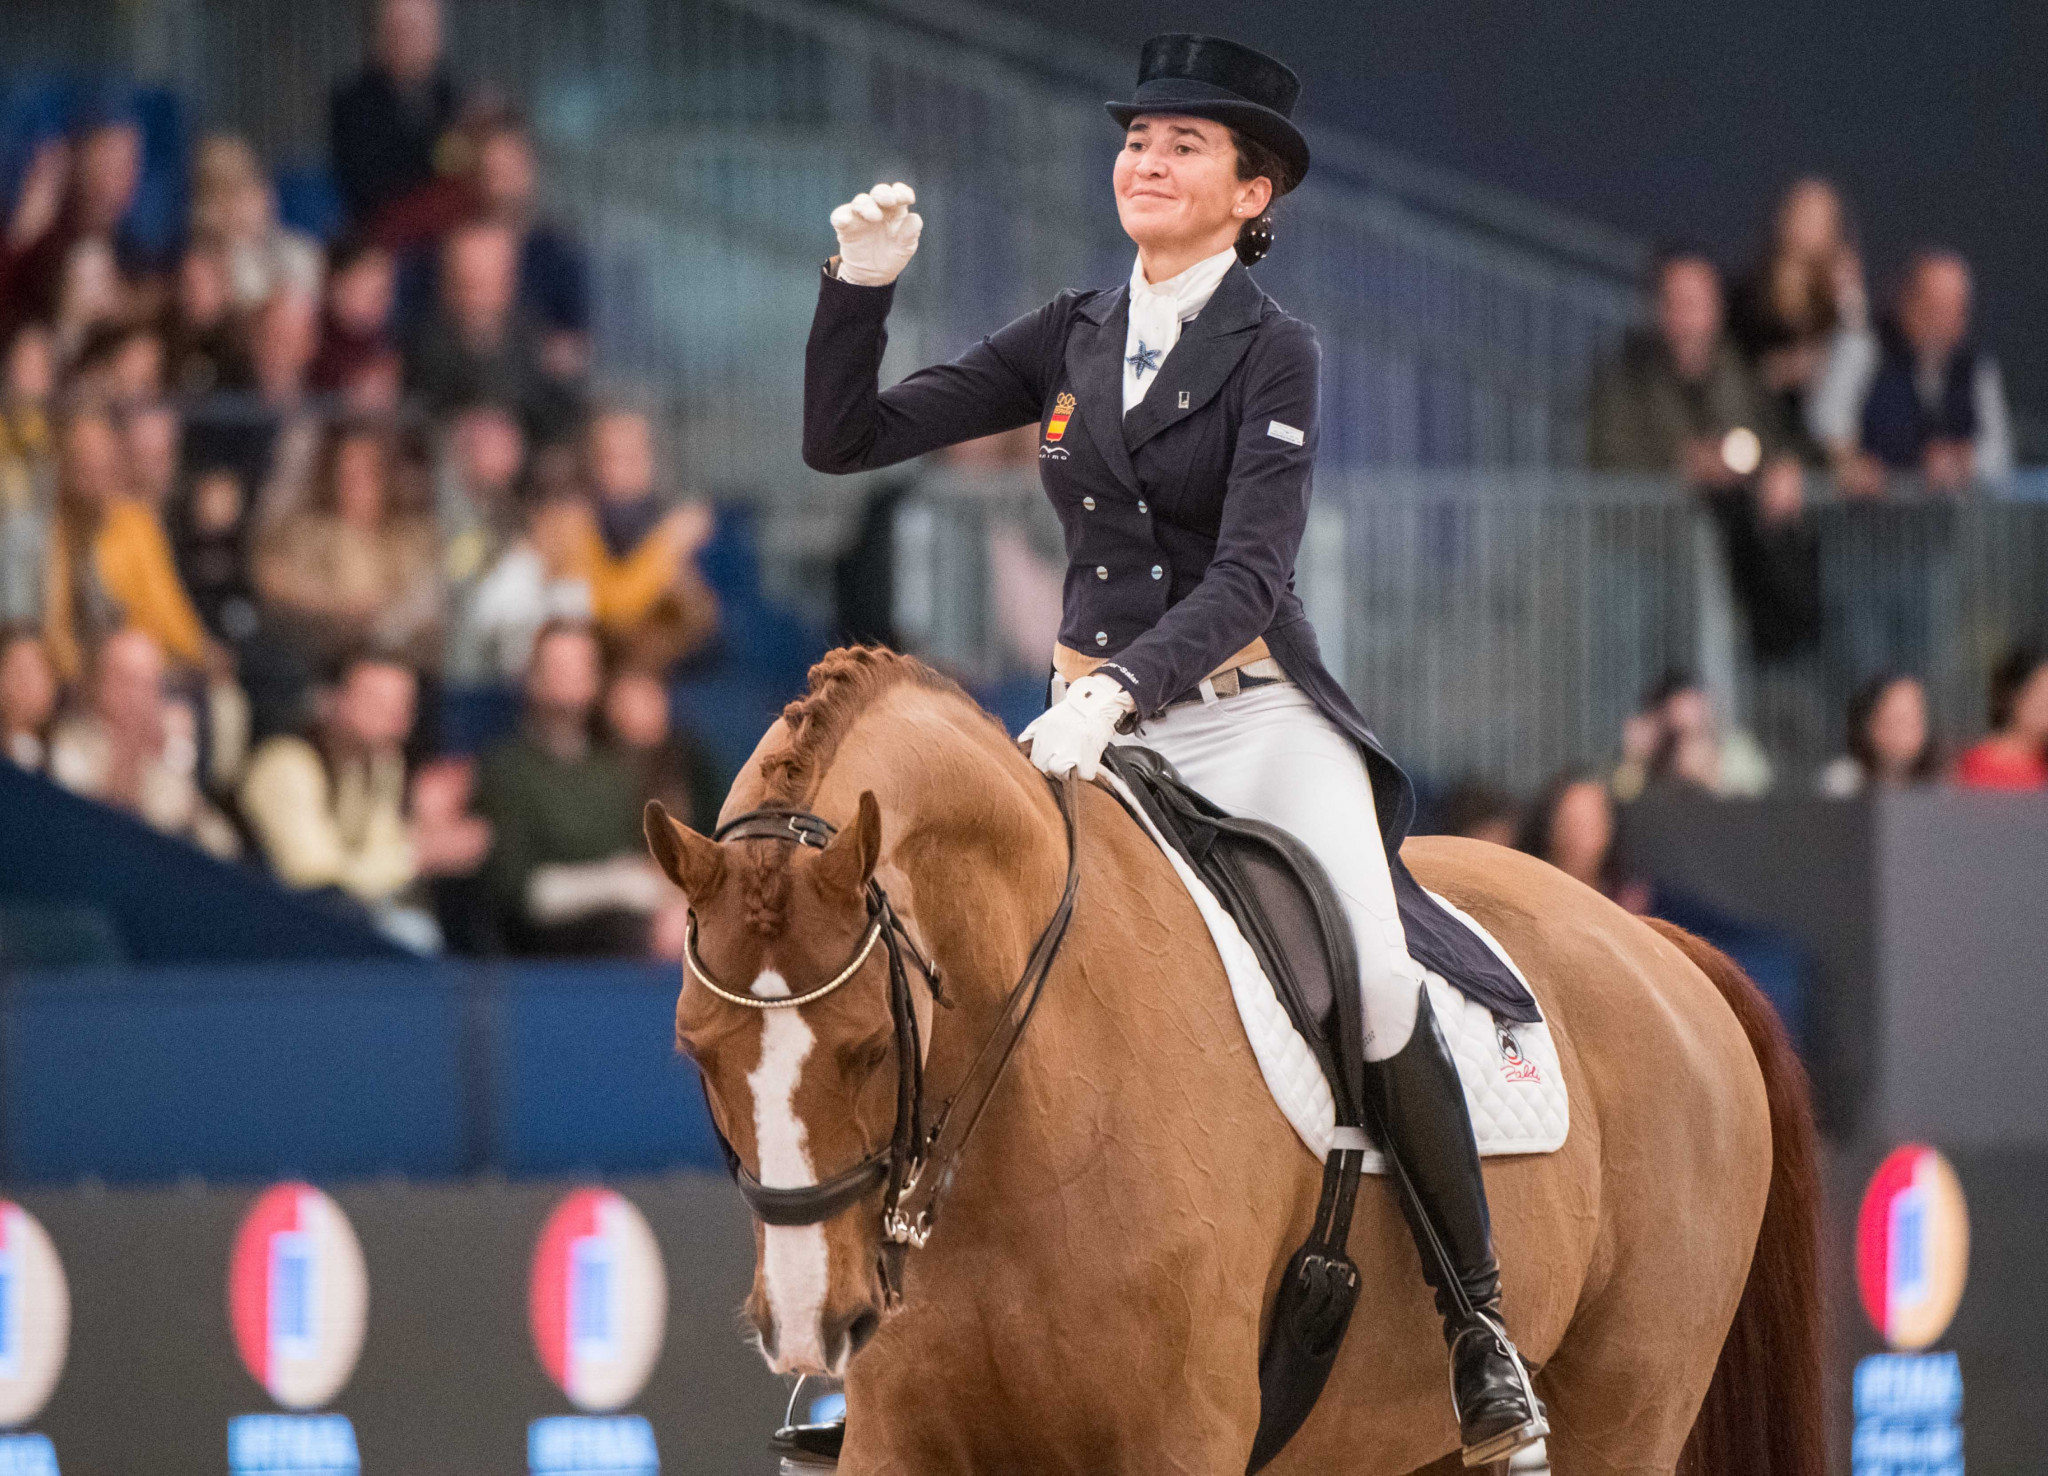 Spain's Beatriz Ferrer-Salat claimed a home victory at the FEI Dressage World Cup in Madrid ©FEI